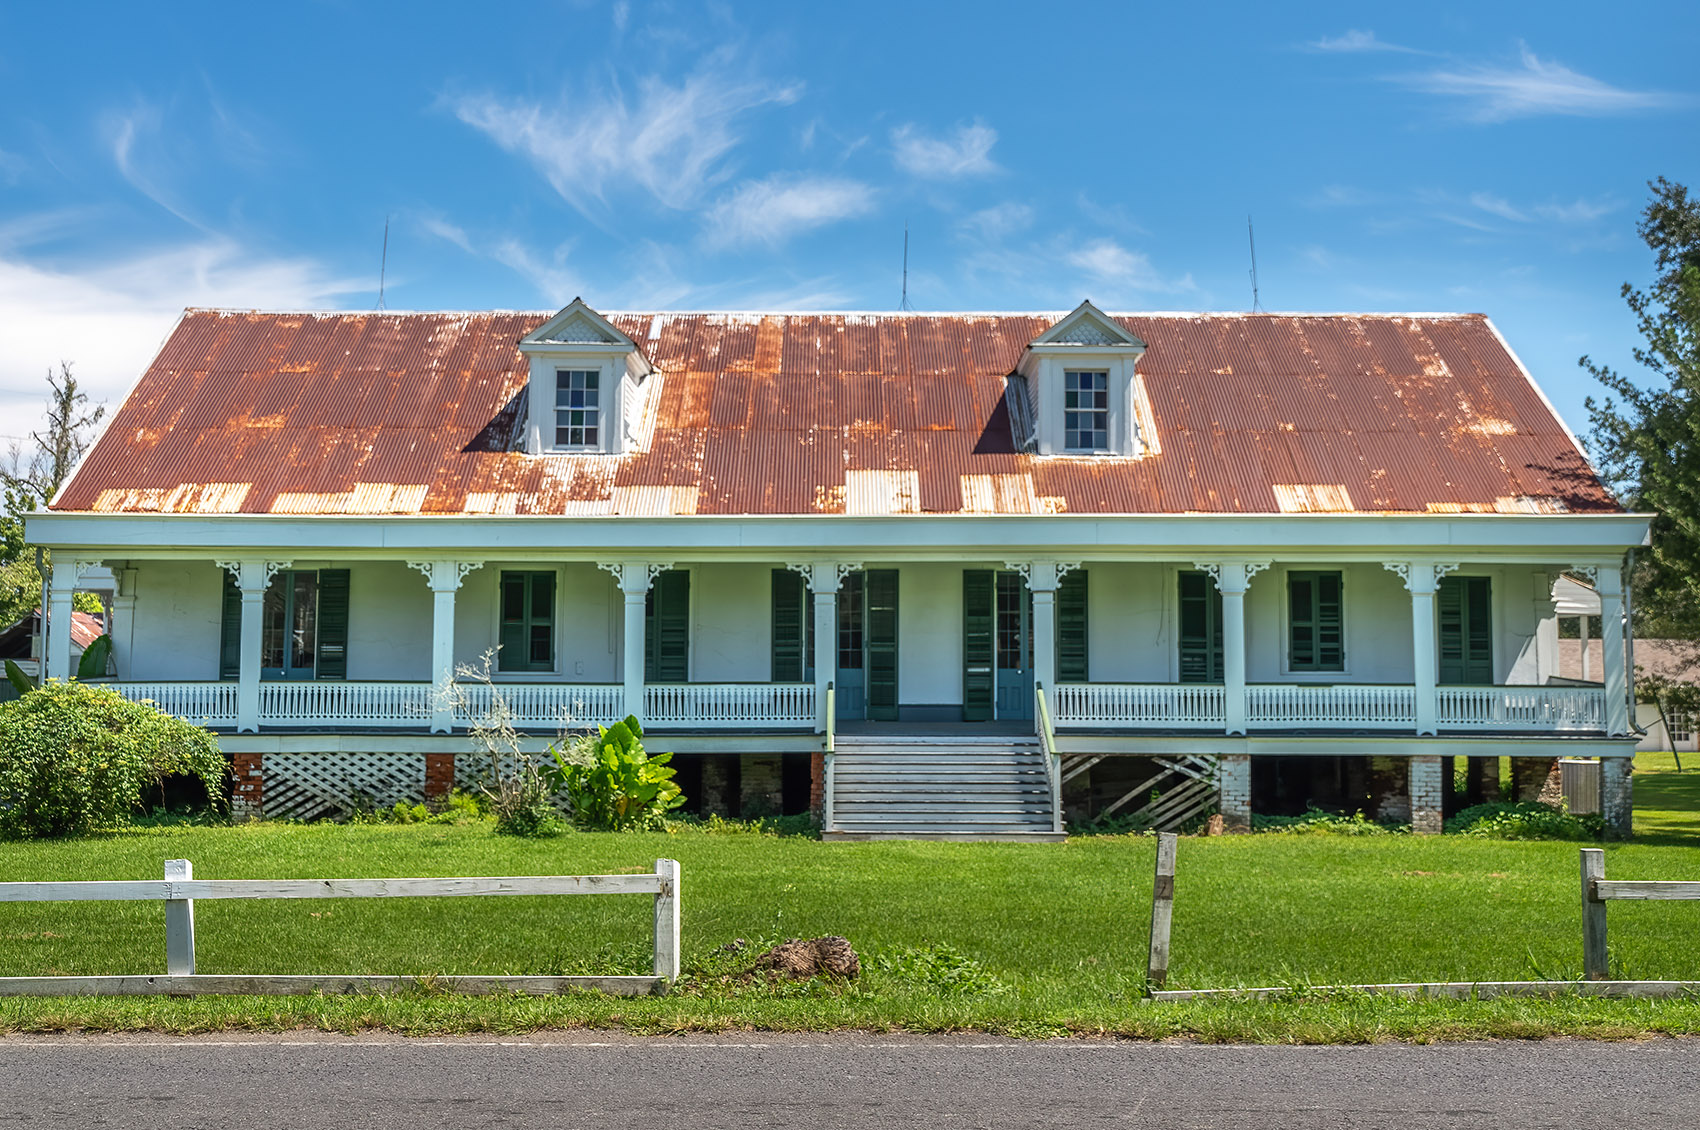 1811 Kid Ory white plantation style house with gallery dormers and rusted metal roof under blue sky